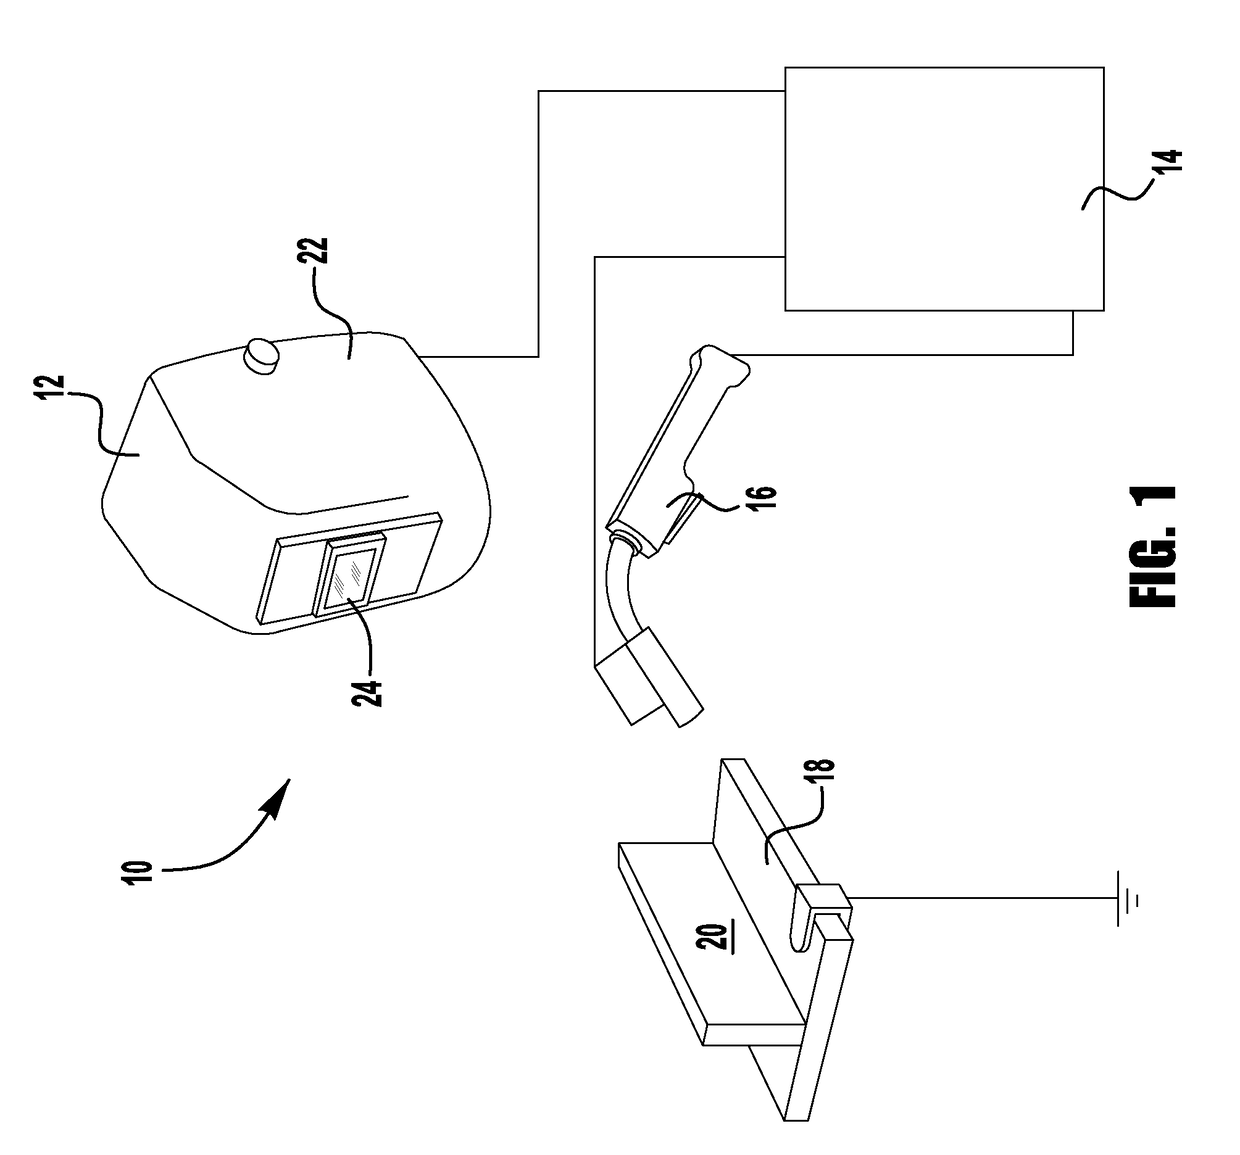 Welding trainer utilizing a head up display to display simulated and real-world objects